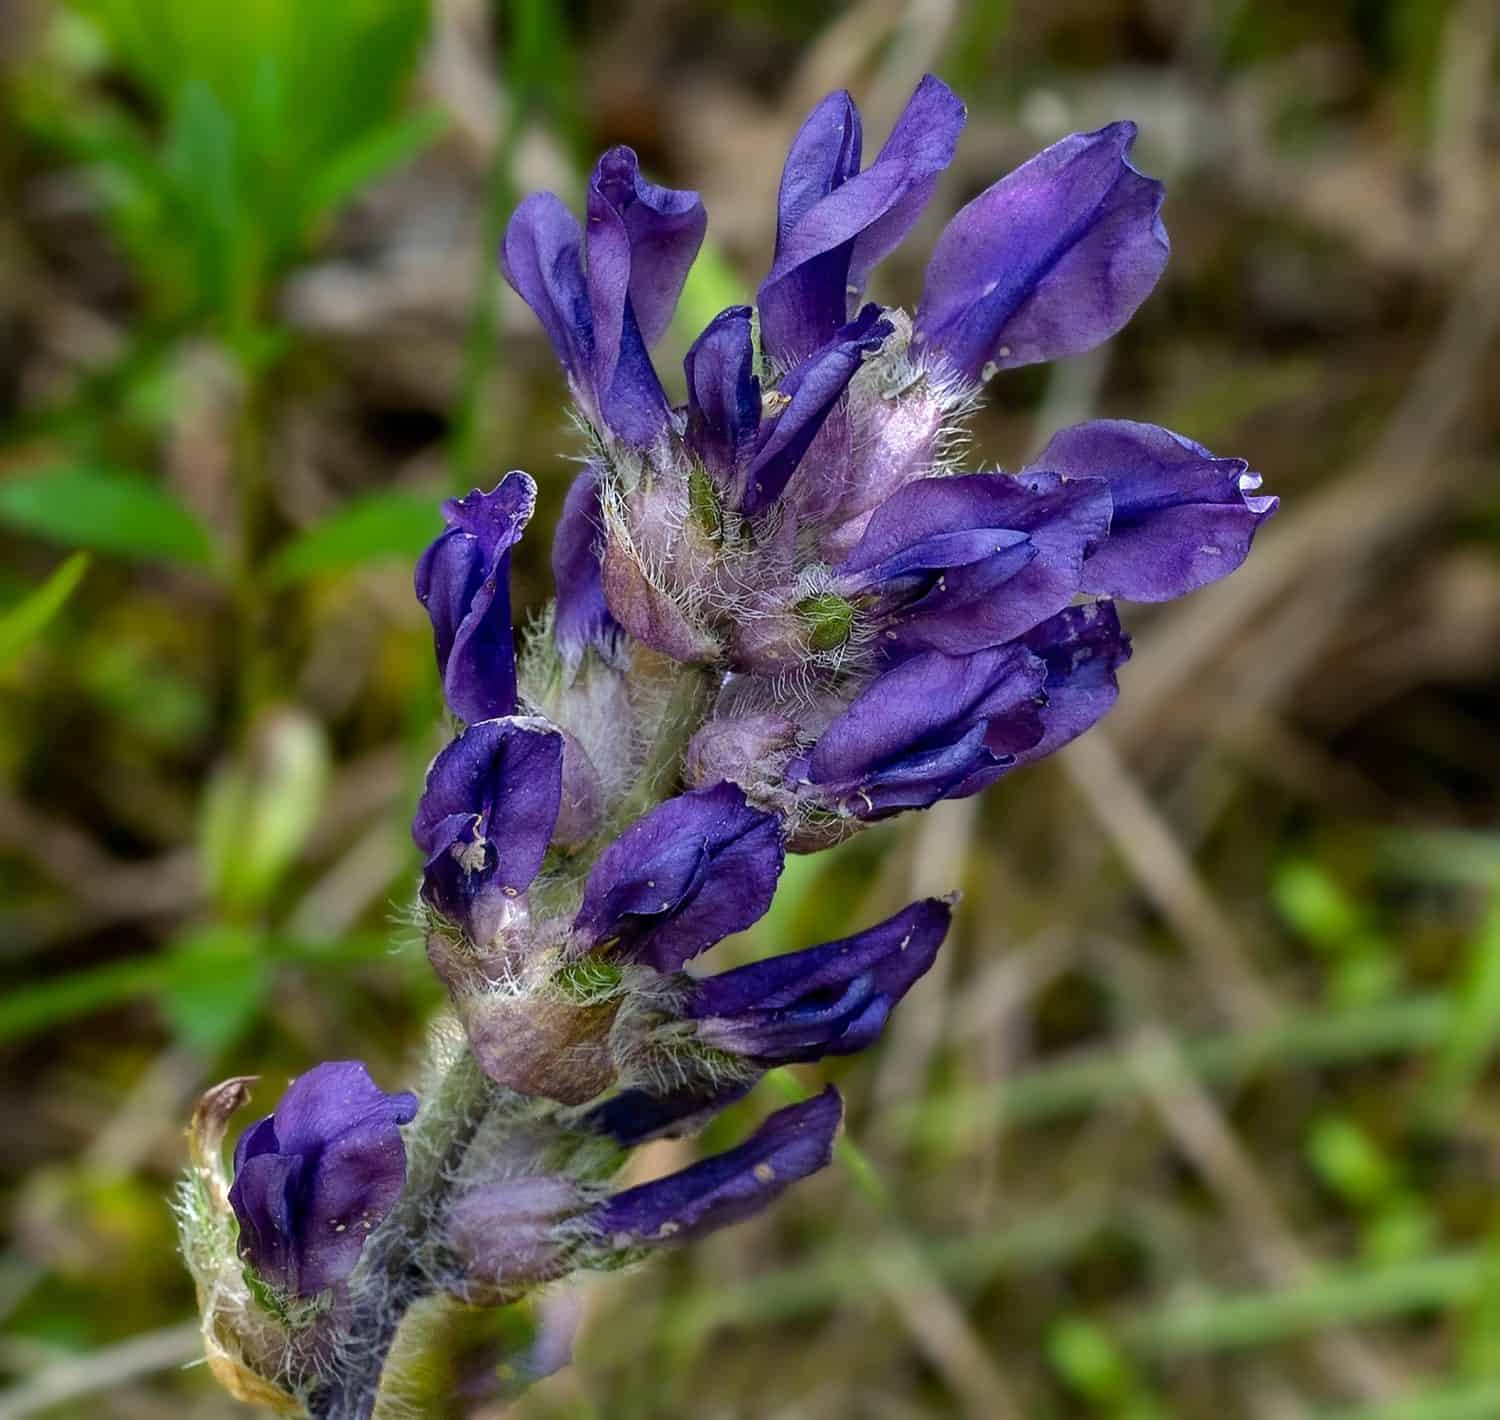 A macro  photo of the flower spike of Nashville Breadroot, Pediomelum subacaule, in the cedar glades of middle Tennessee. This wildflower is endemic to limestone glades. The flowers are a dark purple 